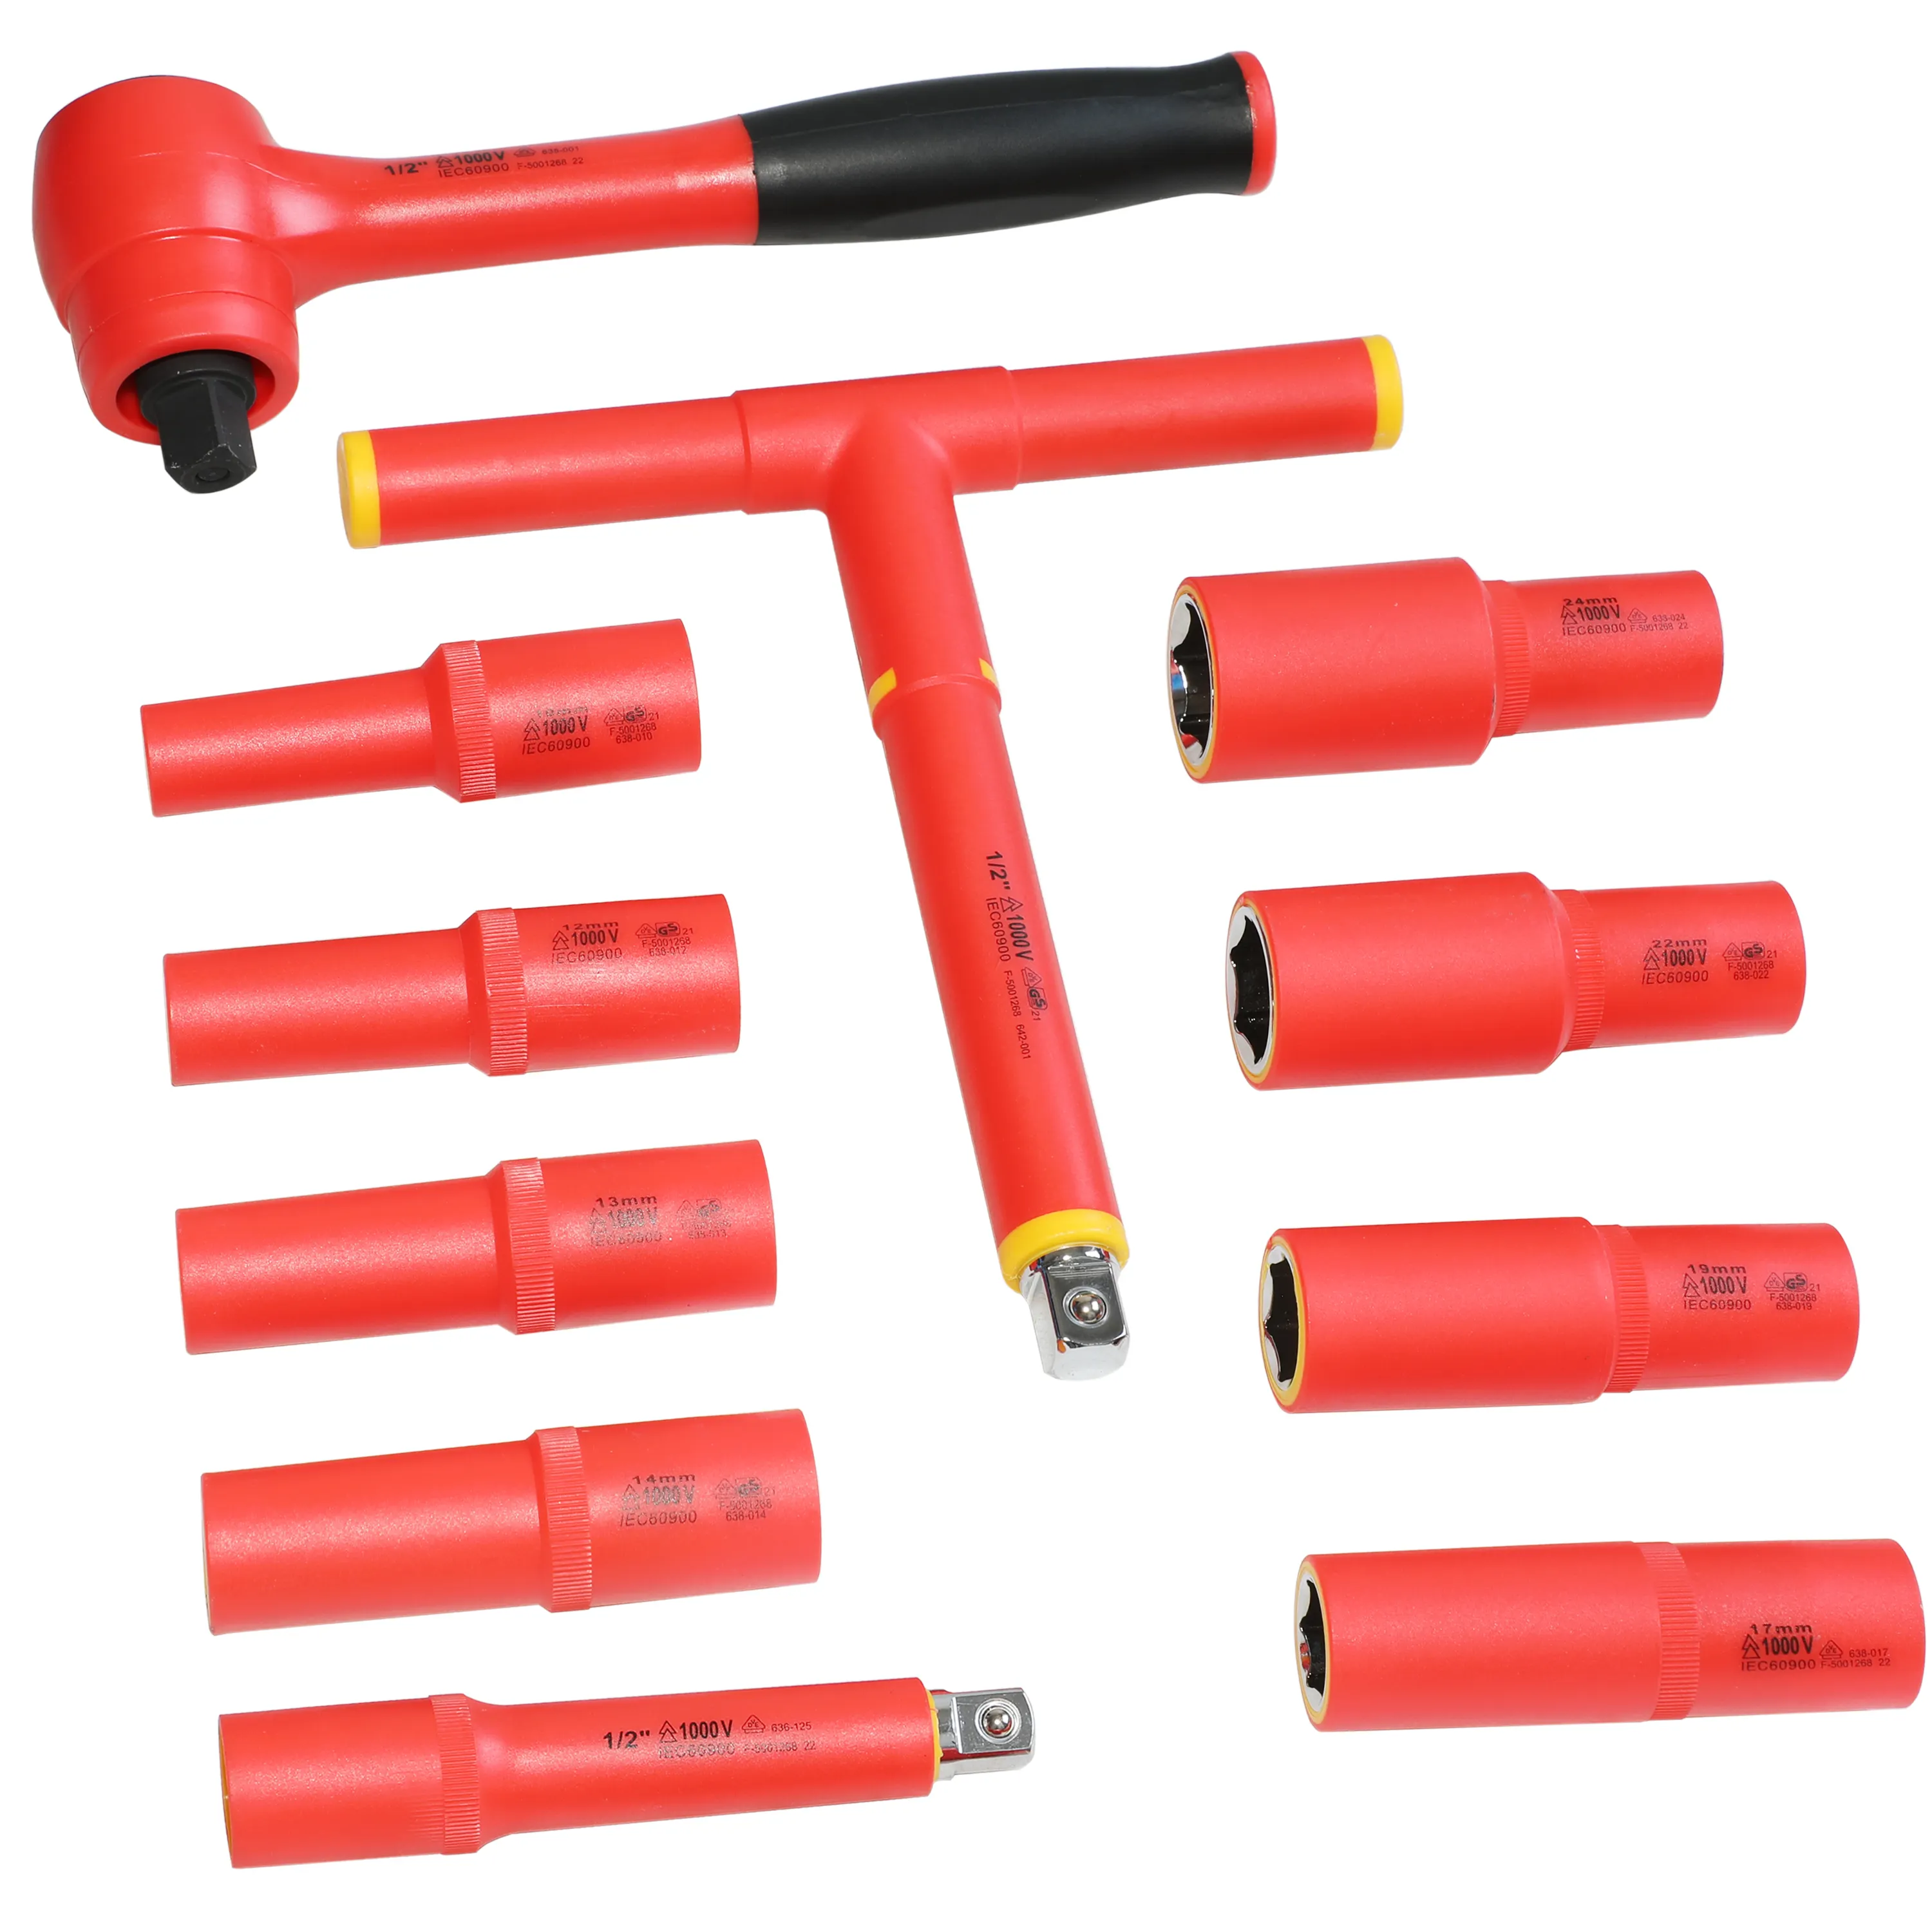 11 Pieces New Energy Insulated Socket Wrench 1000-Volt Insulated 1/2 in. Drive Deep Socket Set